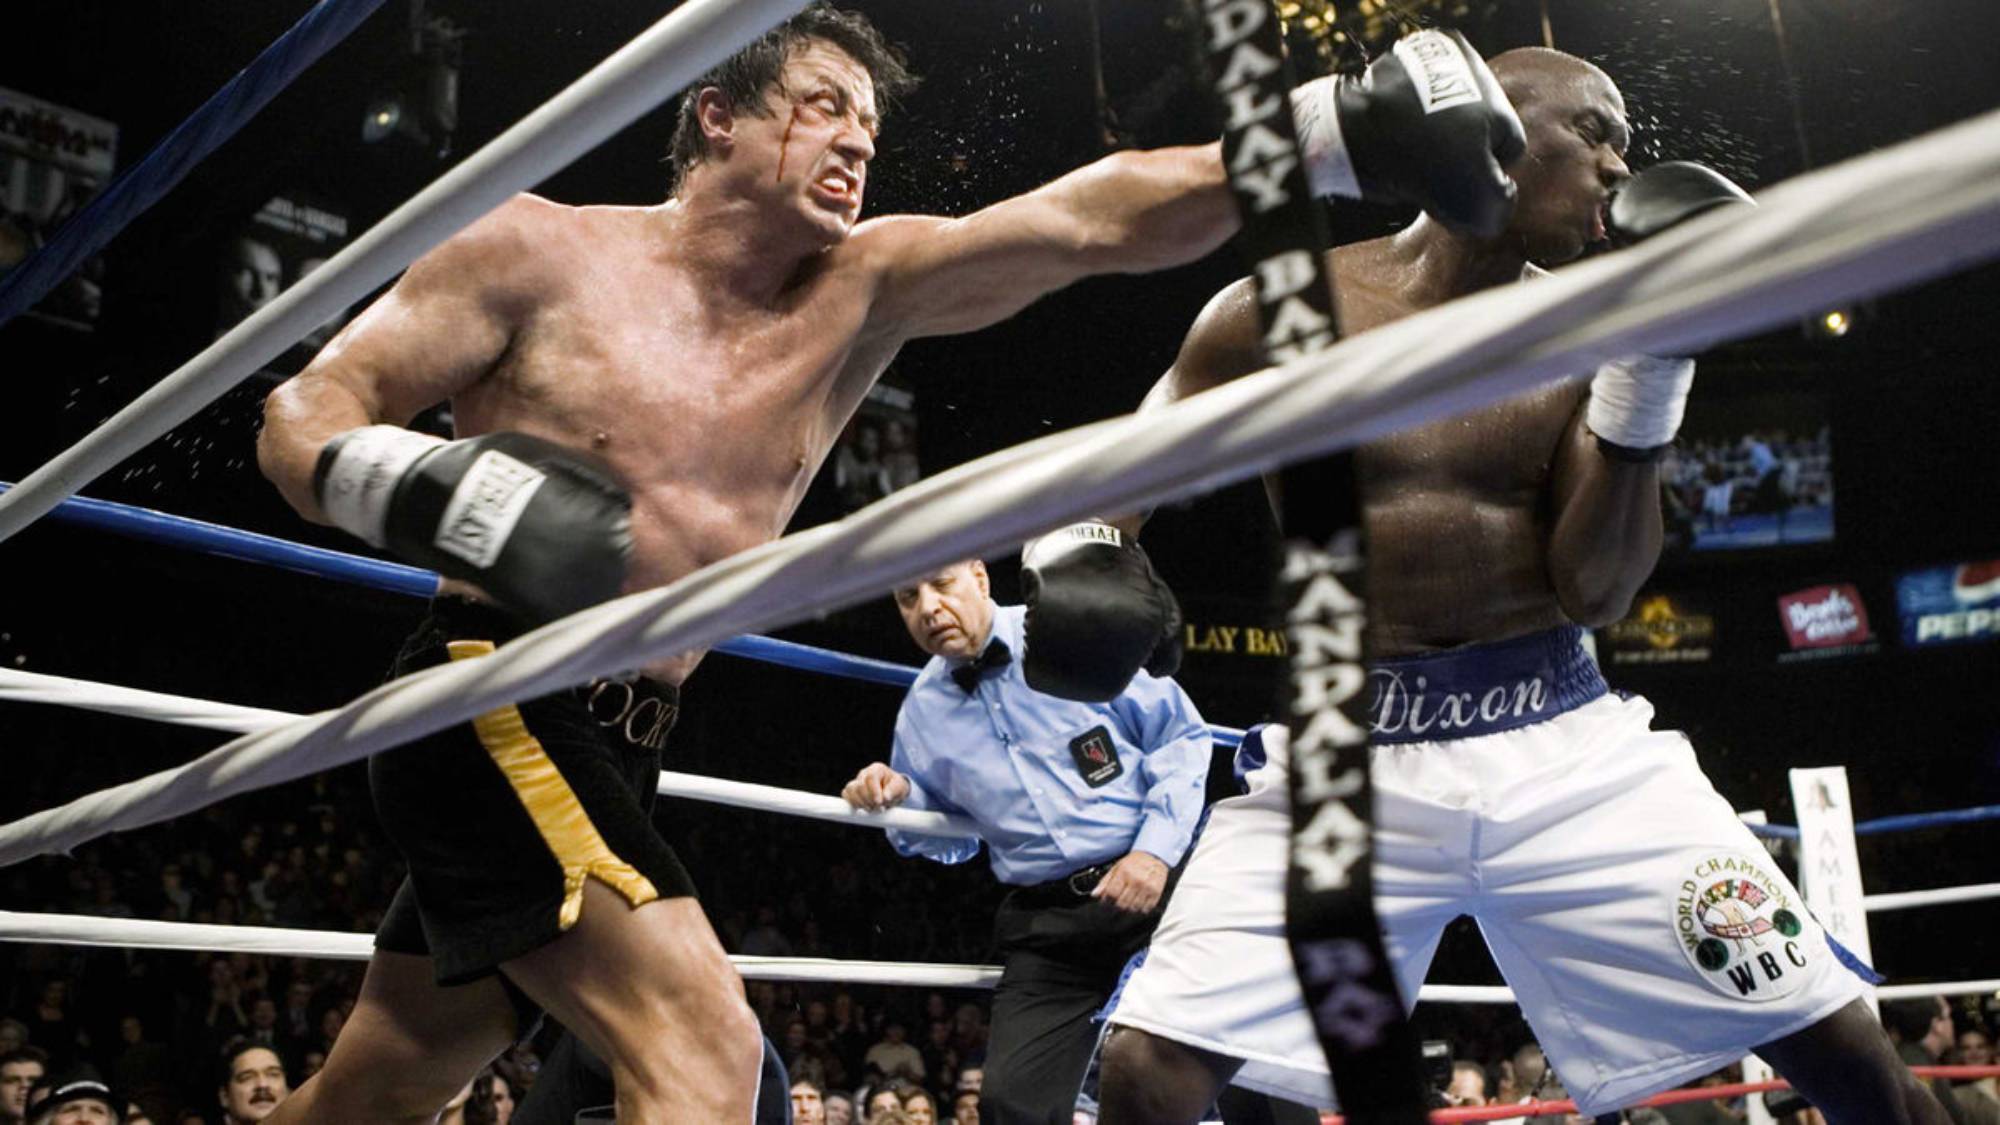 'Rocky Balboa' Sylvester Stallone as Rocky and Antonio Tarver as Mason 'The Line' Dixon. Rocky punches Mason in the face, while they're both wearing black boxing gloves in the ring.